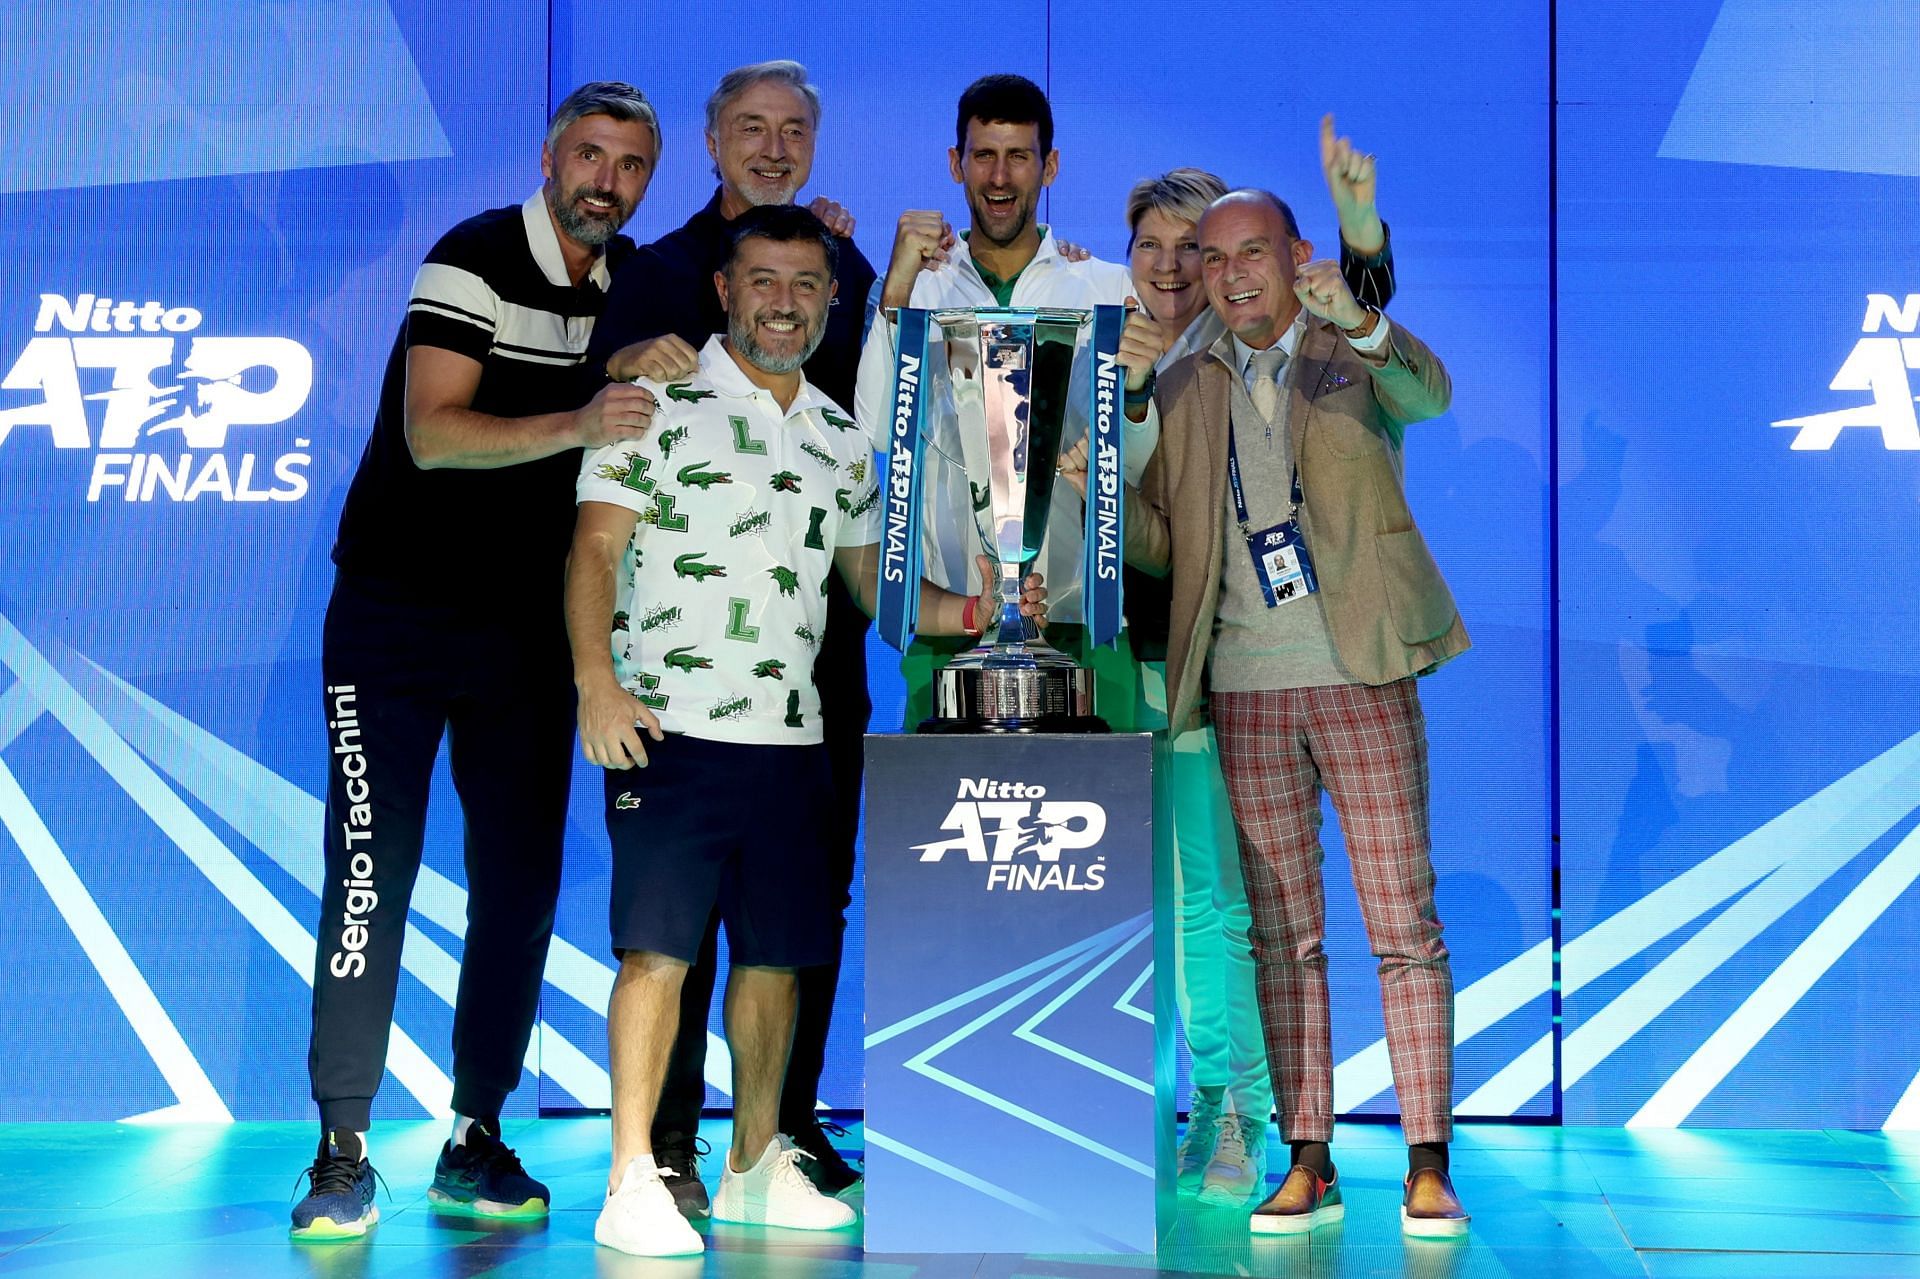 Novak Djokovic (top row, third from left) celebrates his ATP Finals title with his team.